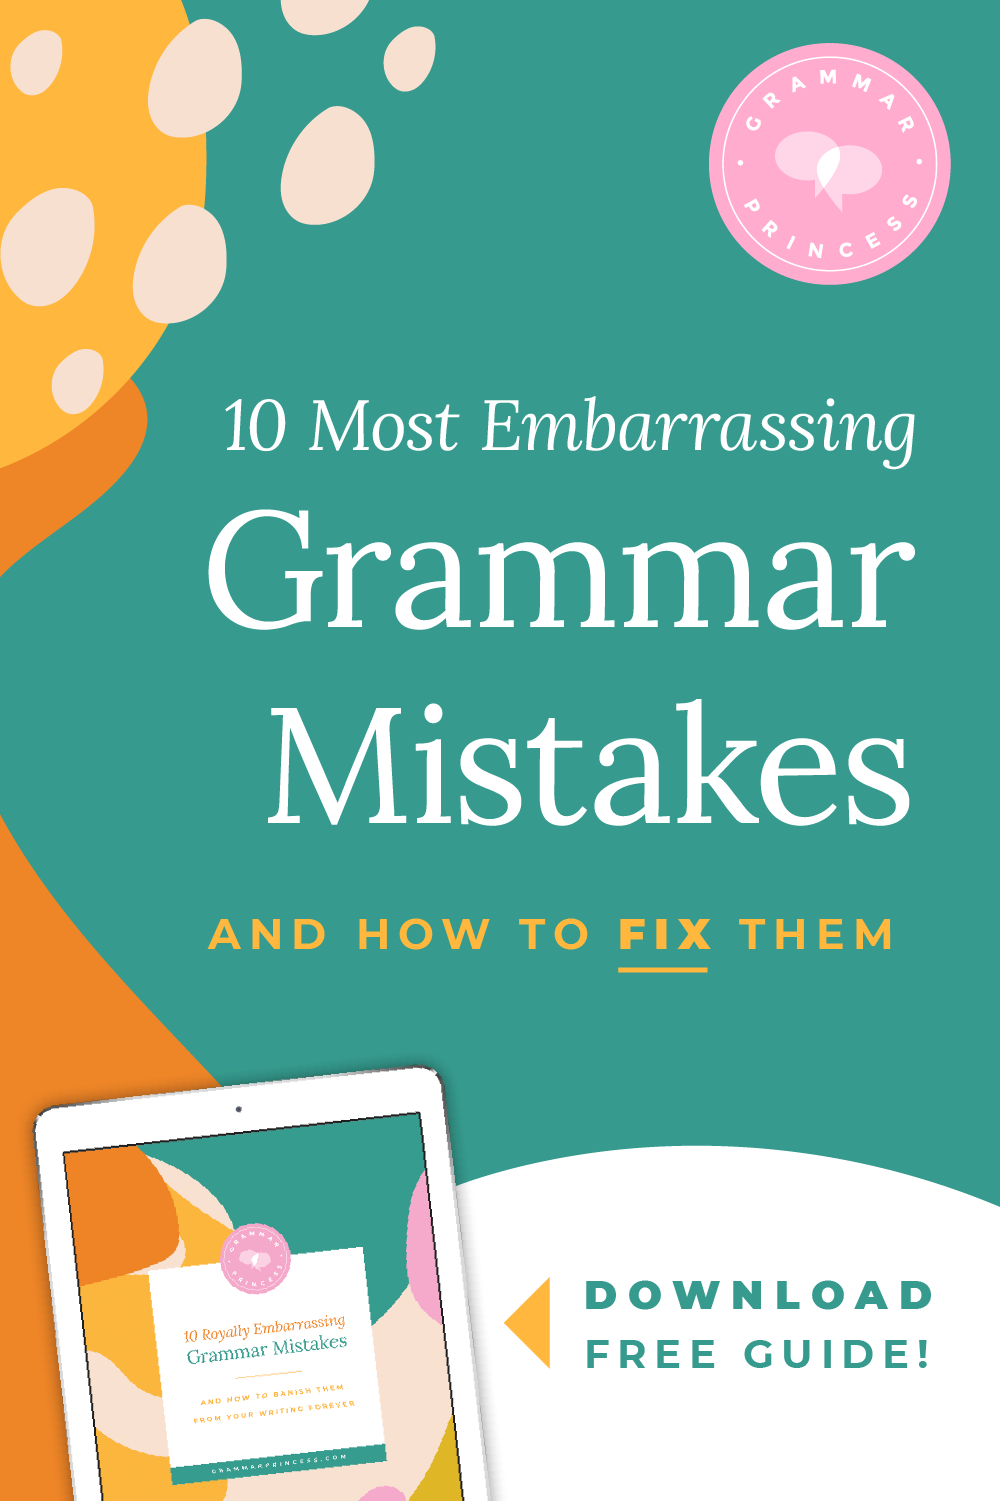 Tired of bad grammar making you look bad? This guide is for you! Download now for my top writing tips for business, common grammatical mistakes, and proper grammar for writing! #grammar #writing #business #grammartips